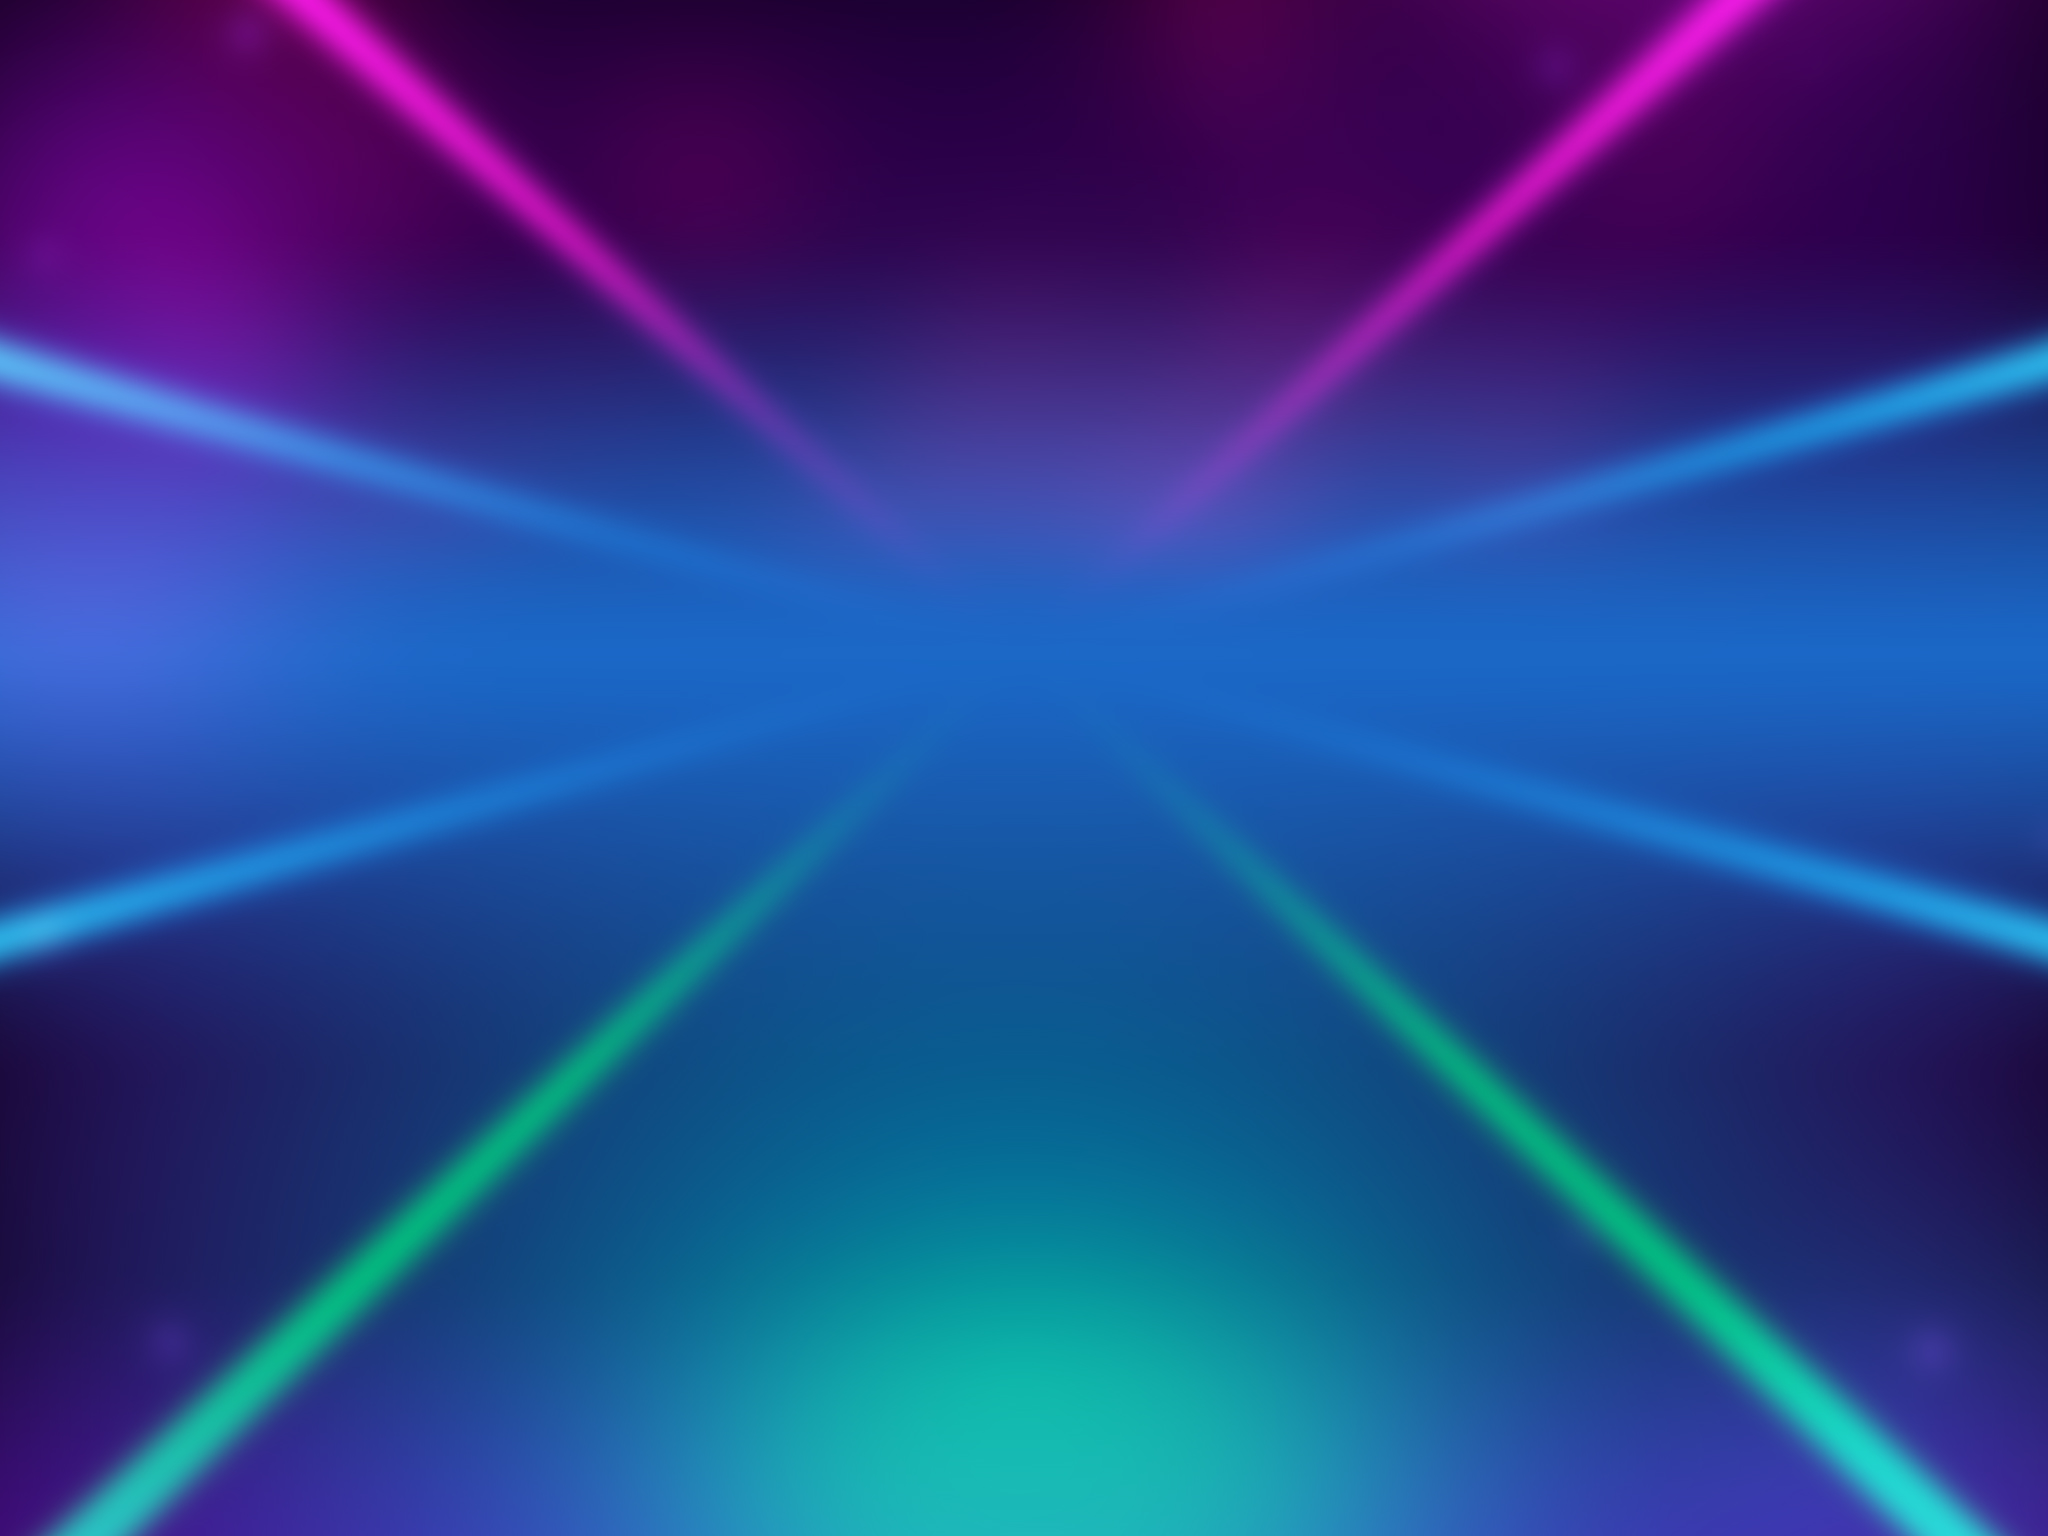 66_background_client_twinspin_250k.jpg thumbnail